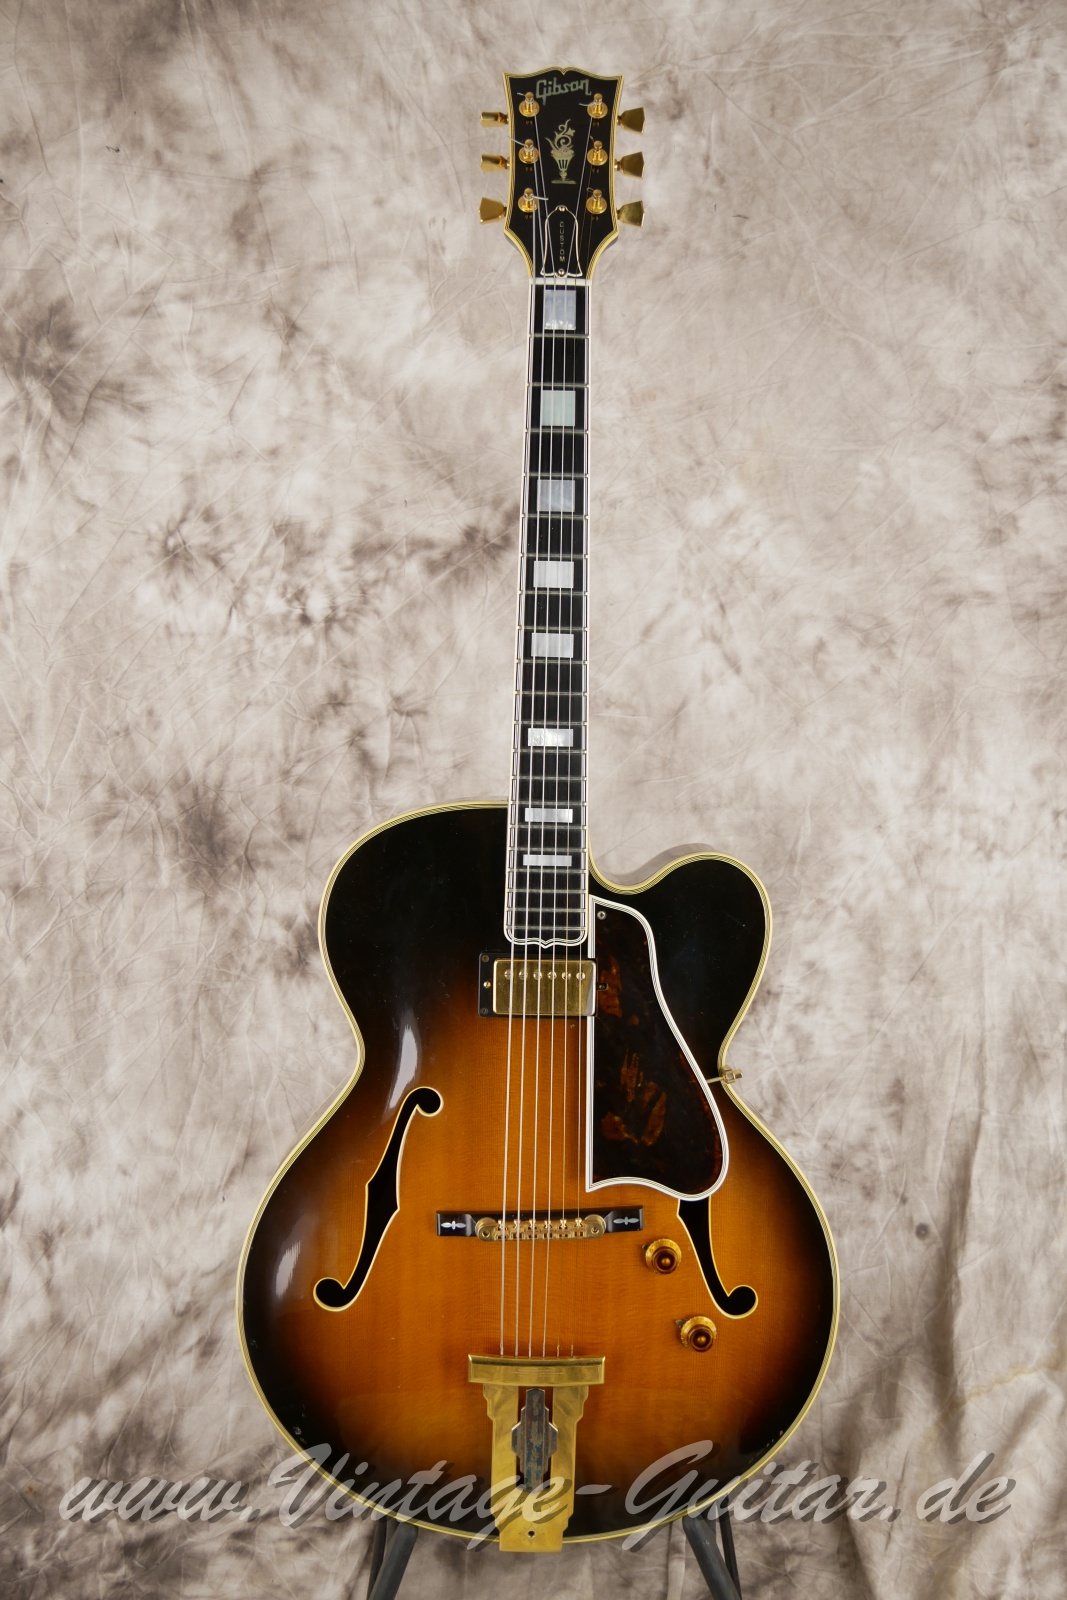 Gibson-L5-Wes-Montgomery-1993-Master-Model-James-Hutchins-001.JPG